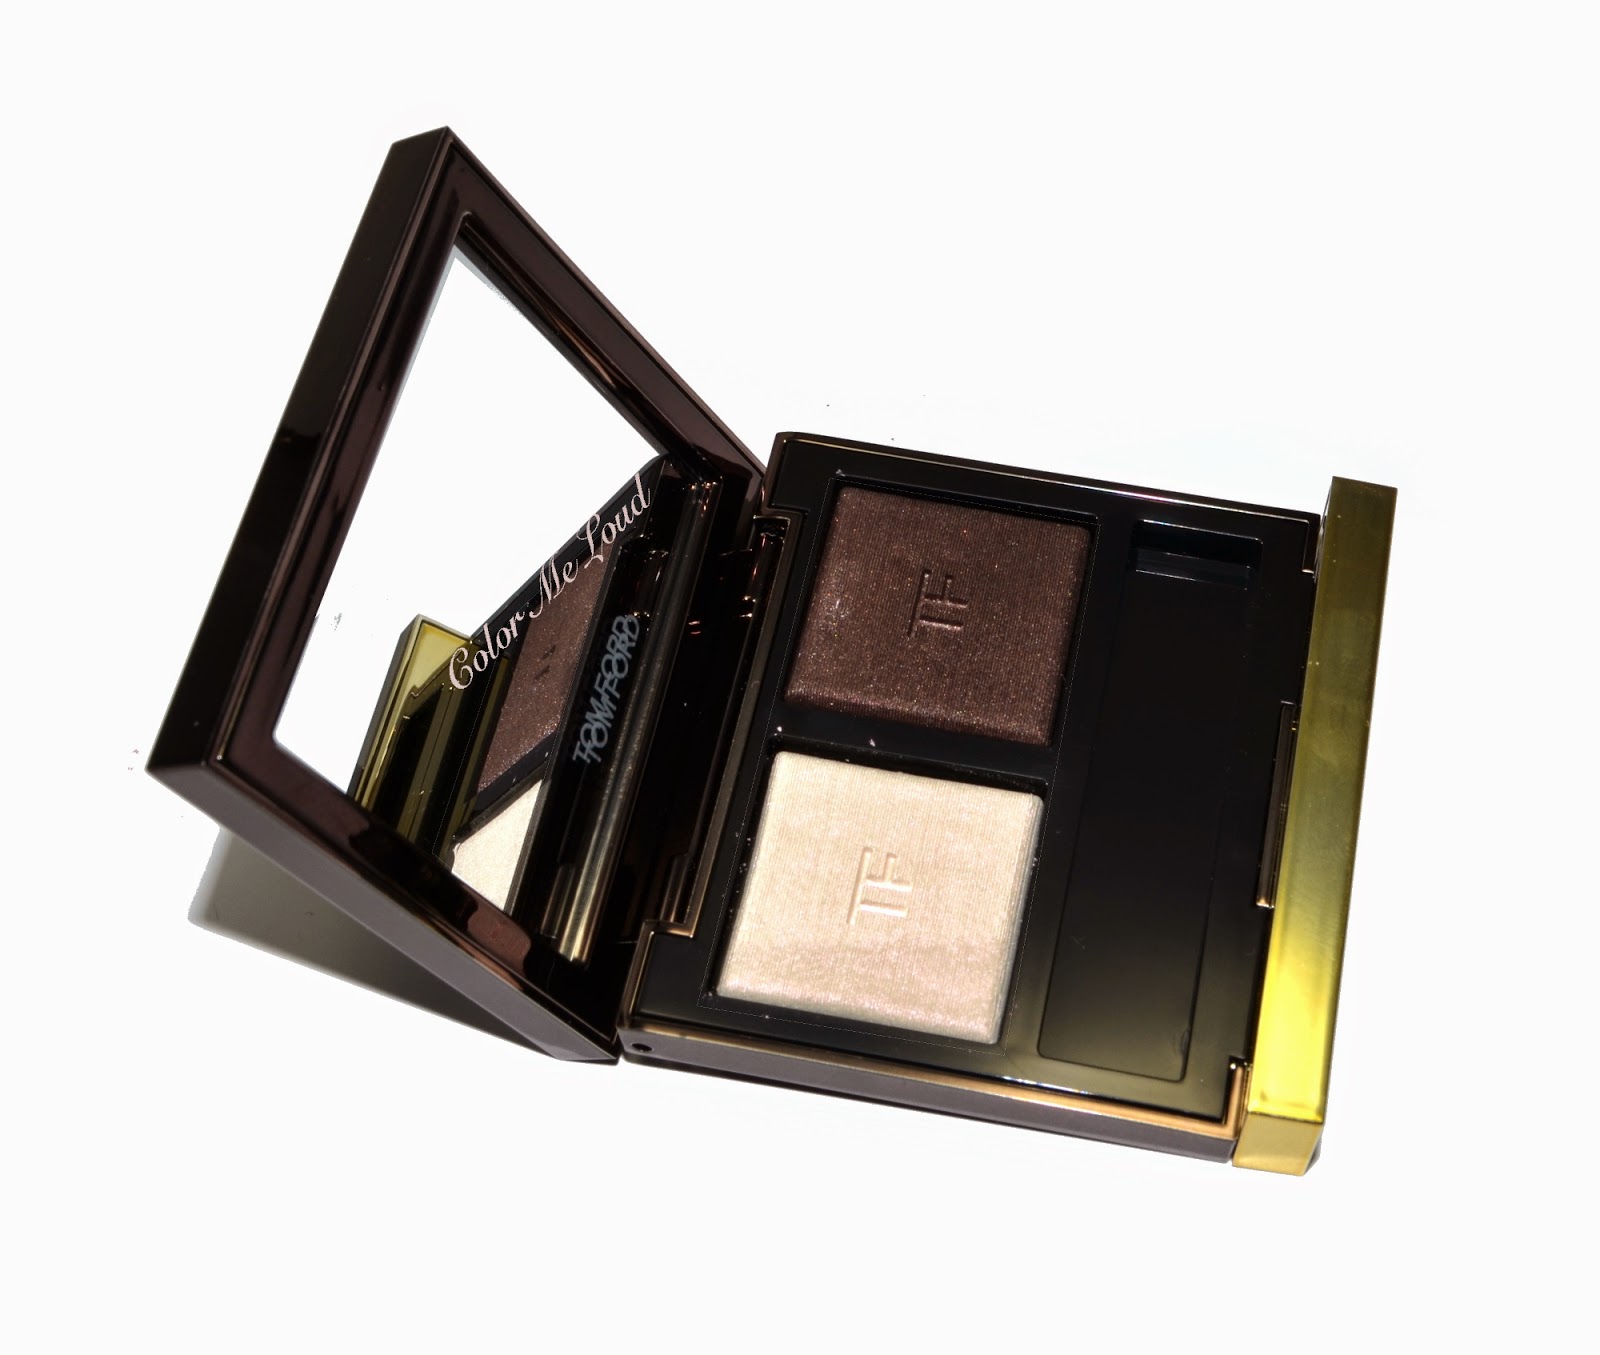 Tom Ford Eye Color Duo #01 Ripe Plum, Review, Swatch, FOTD & Comparisons, for Spring 2015